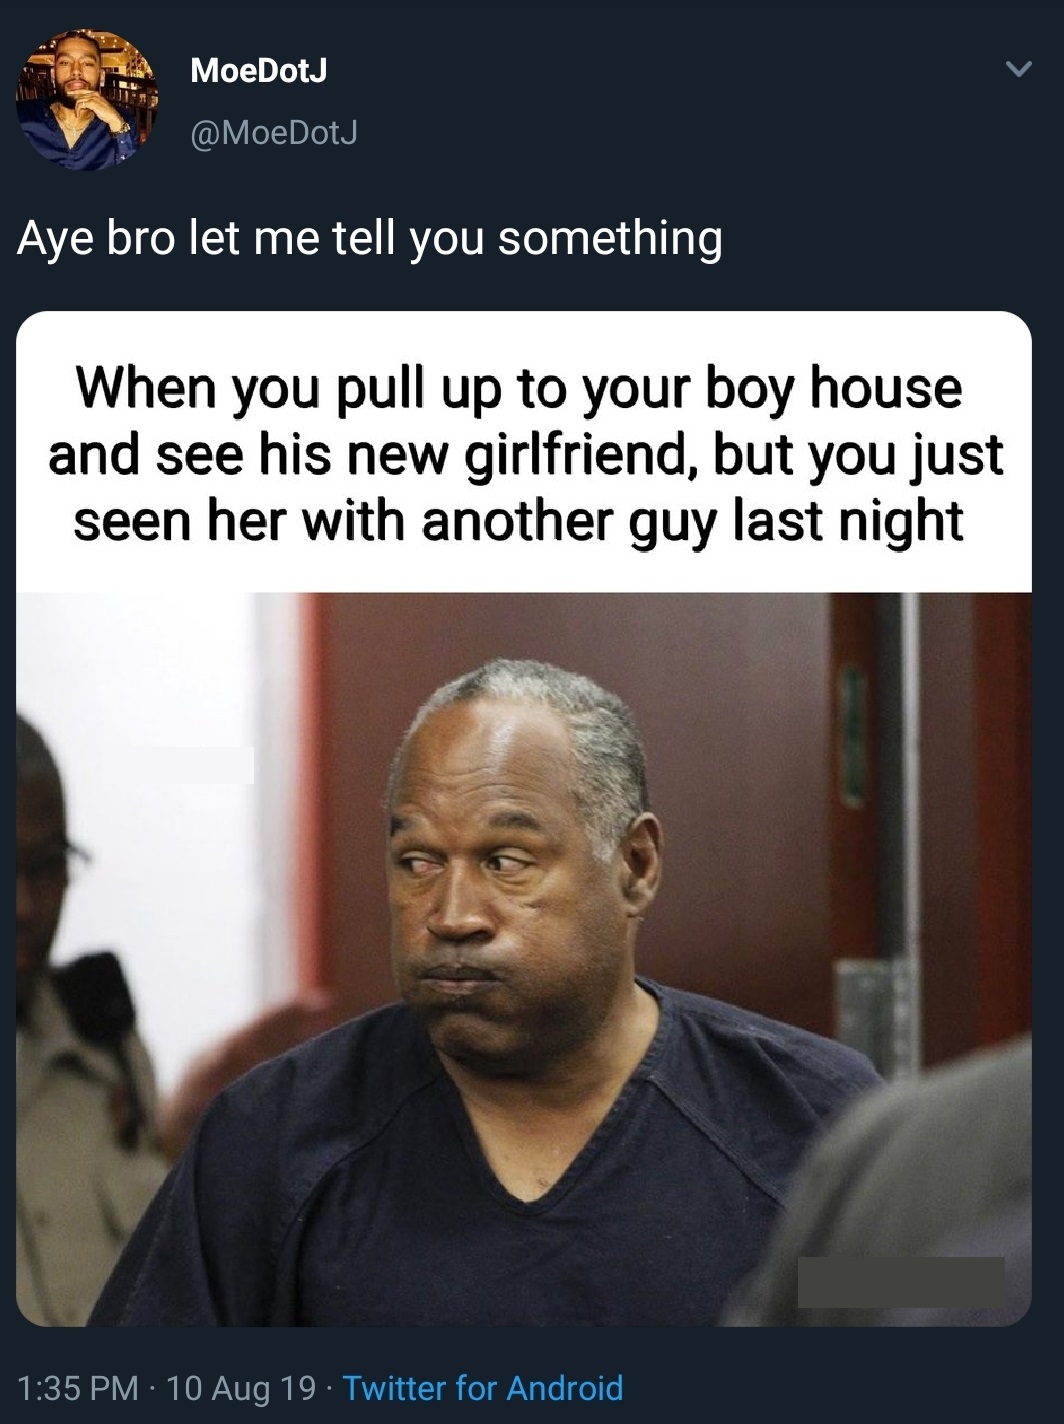 oj simpson 2016 - MoeDotJ Aye bro let me tell you something When you pull up to your boy house and see his new girlfriend, but you just seen her with another guy last night 10 Aug 19. Twitter for Android